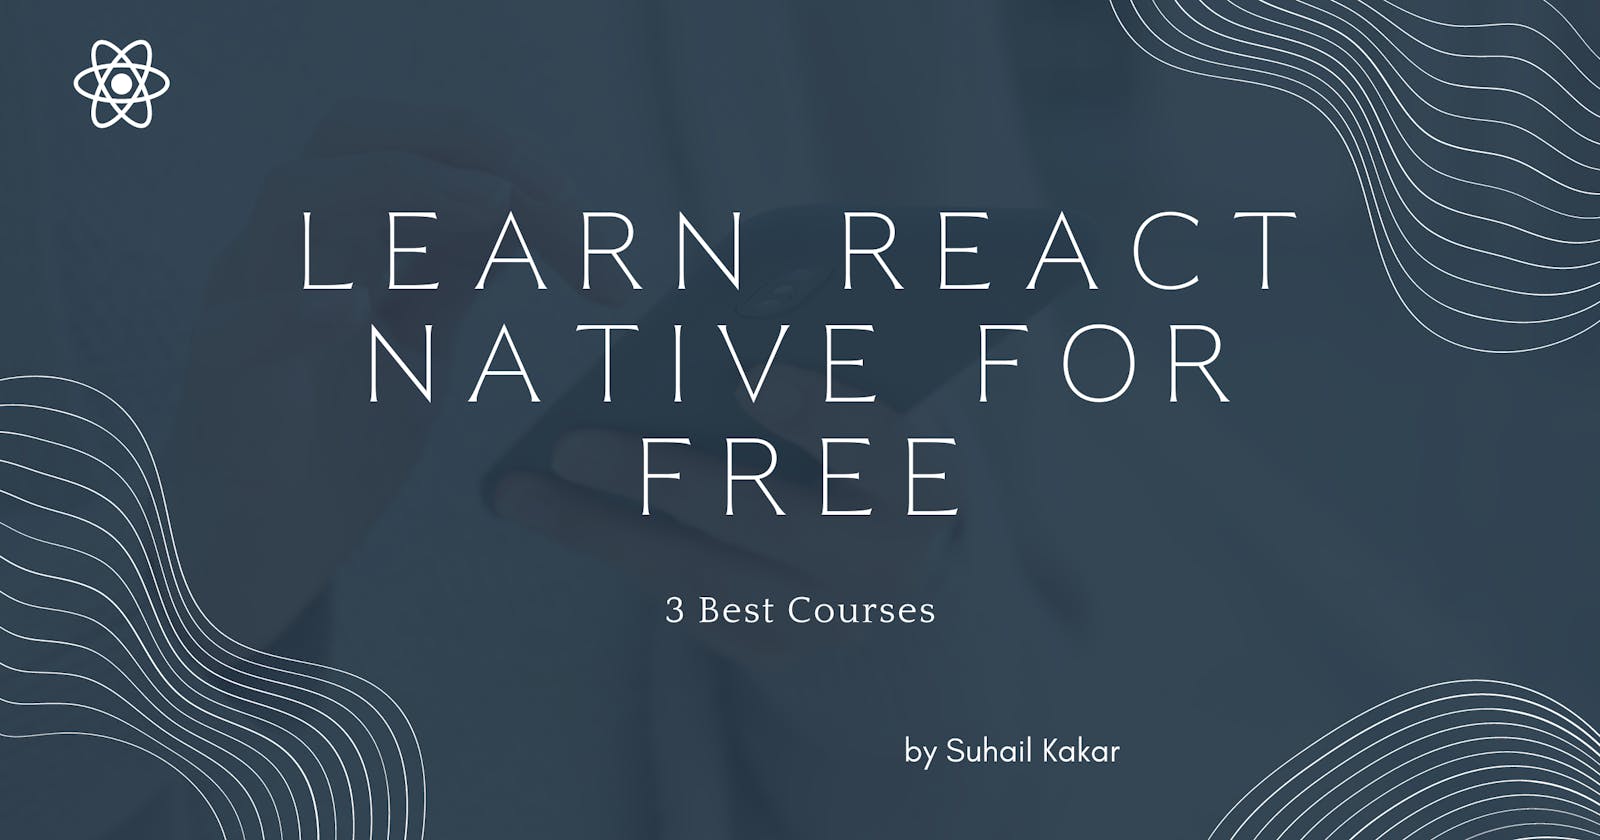 3 Best Courses to Learn React Native For Free